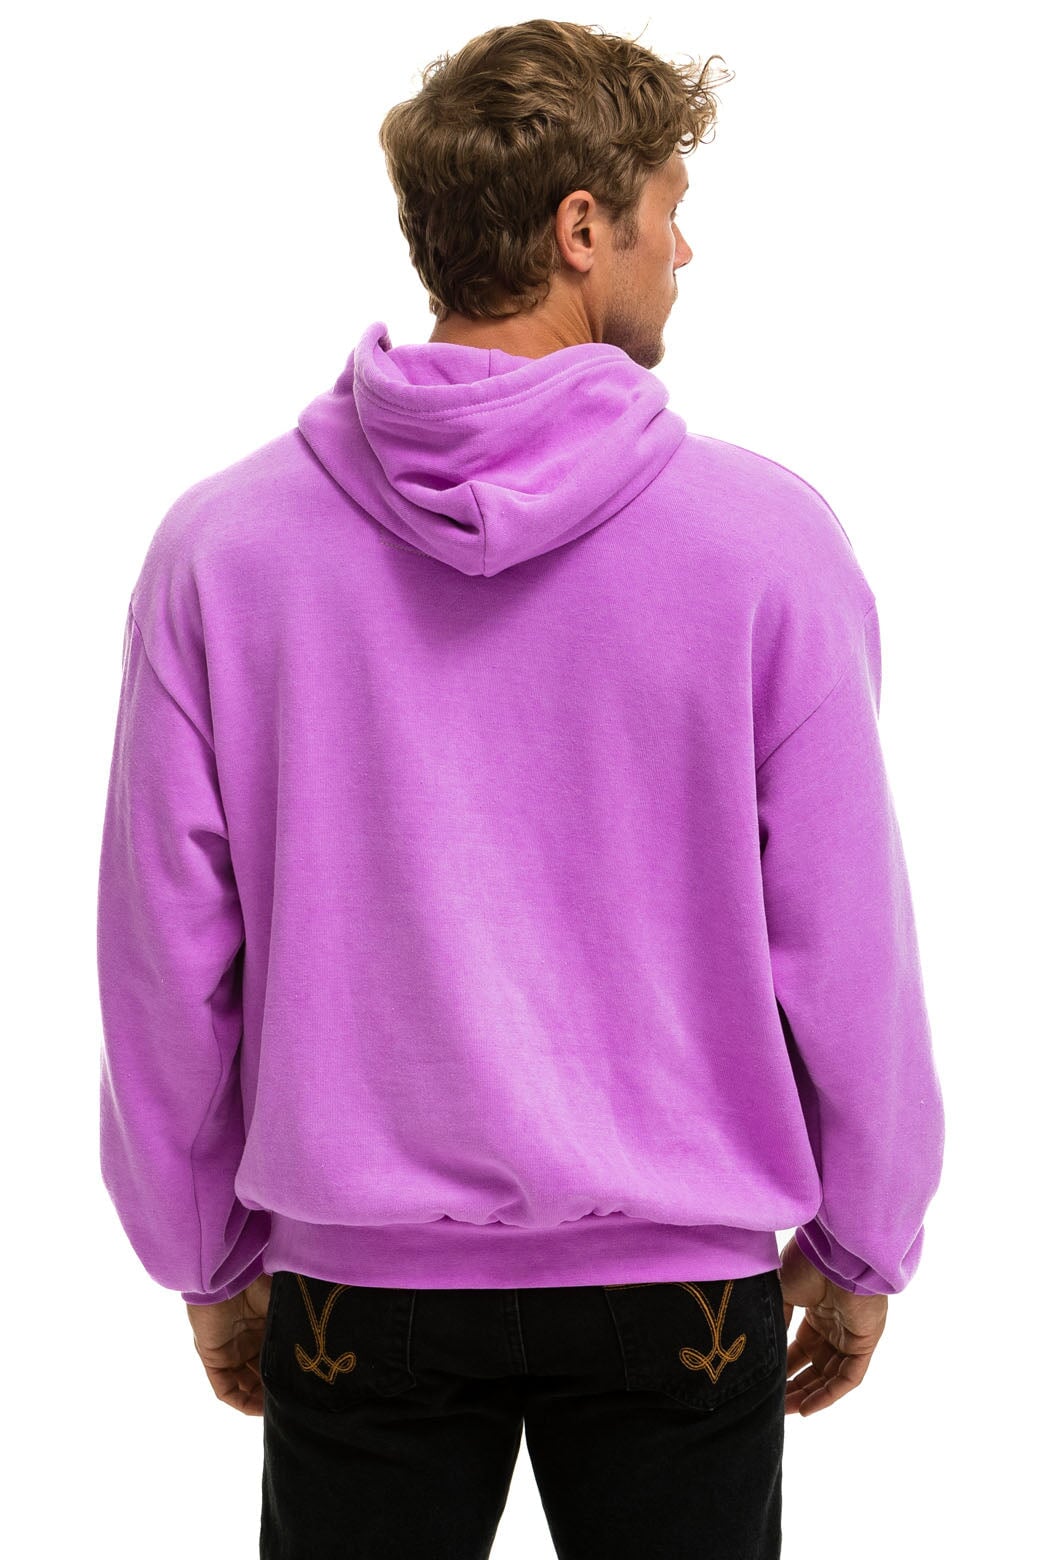 LOGO PULLOVER RELAXED HOODIE - NEON PURPLE - Aviator Nation